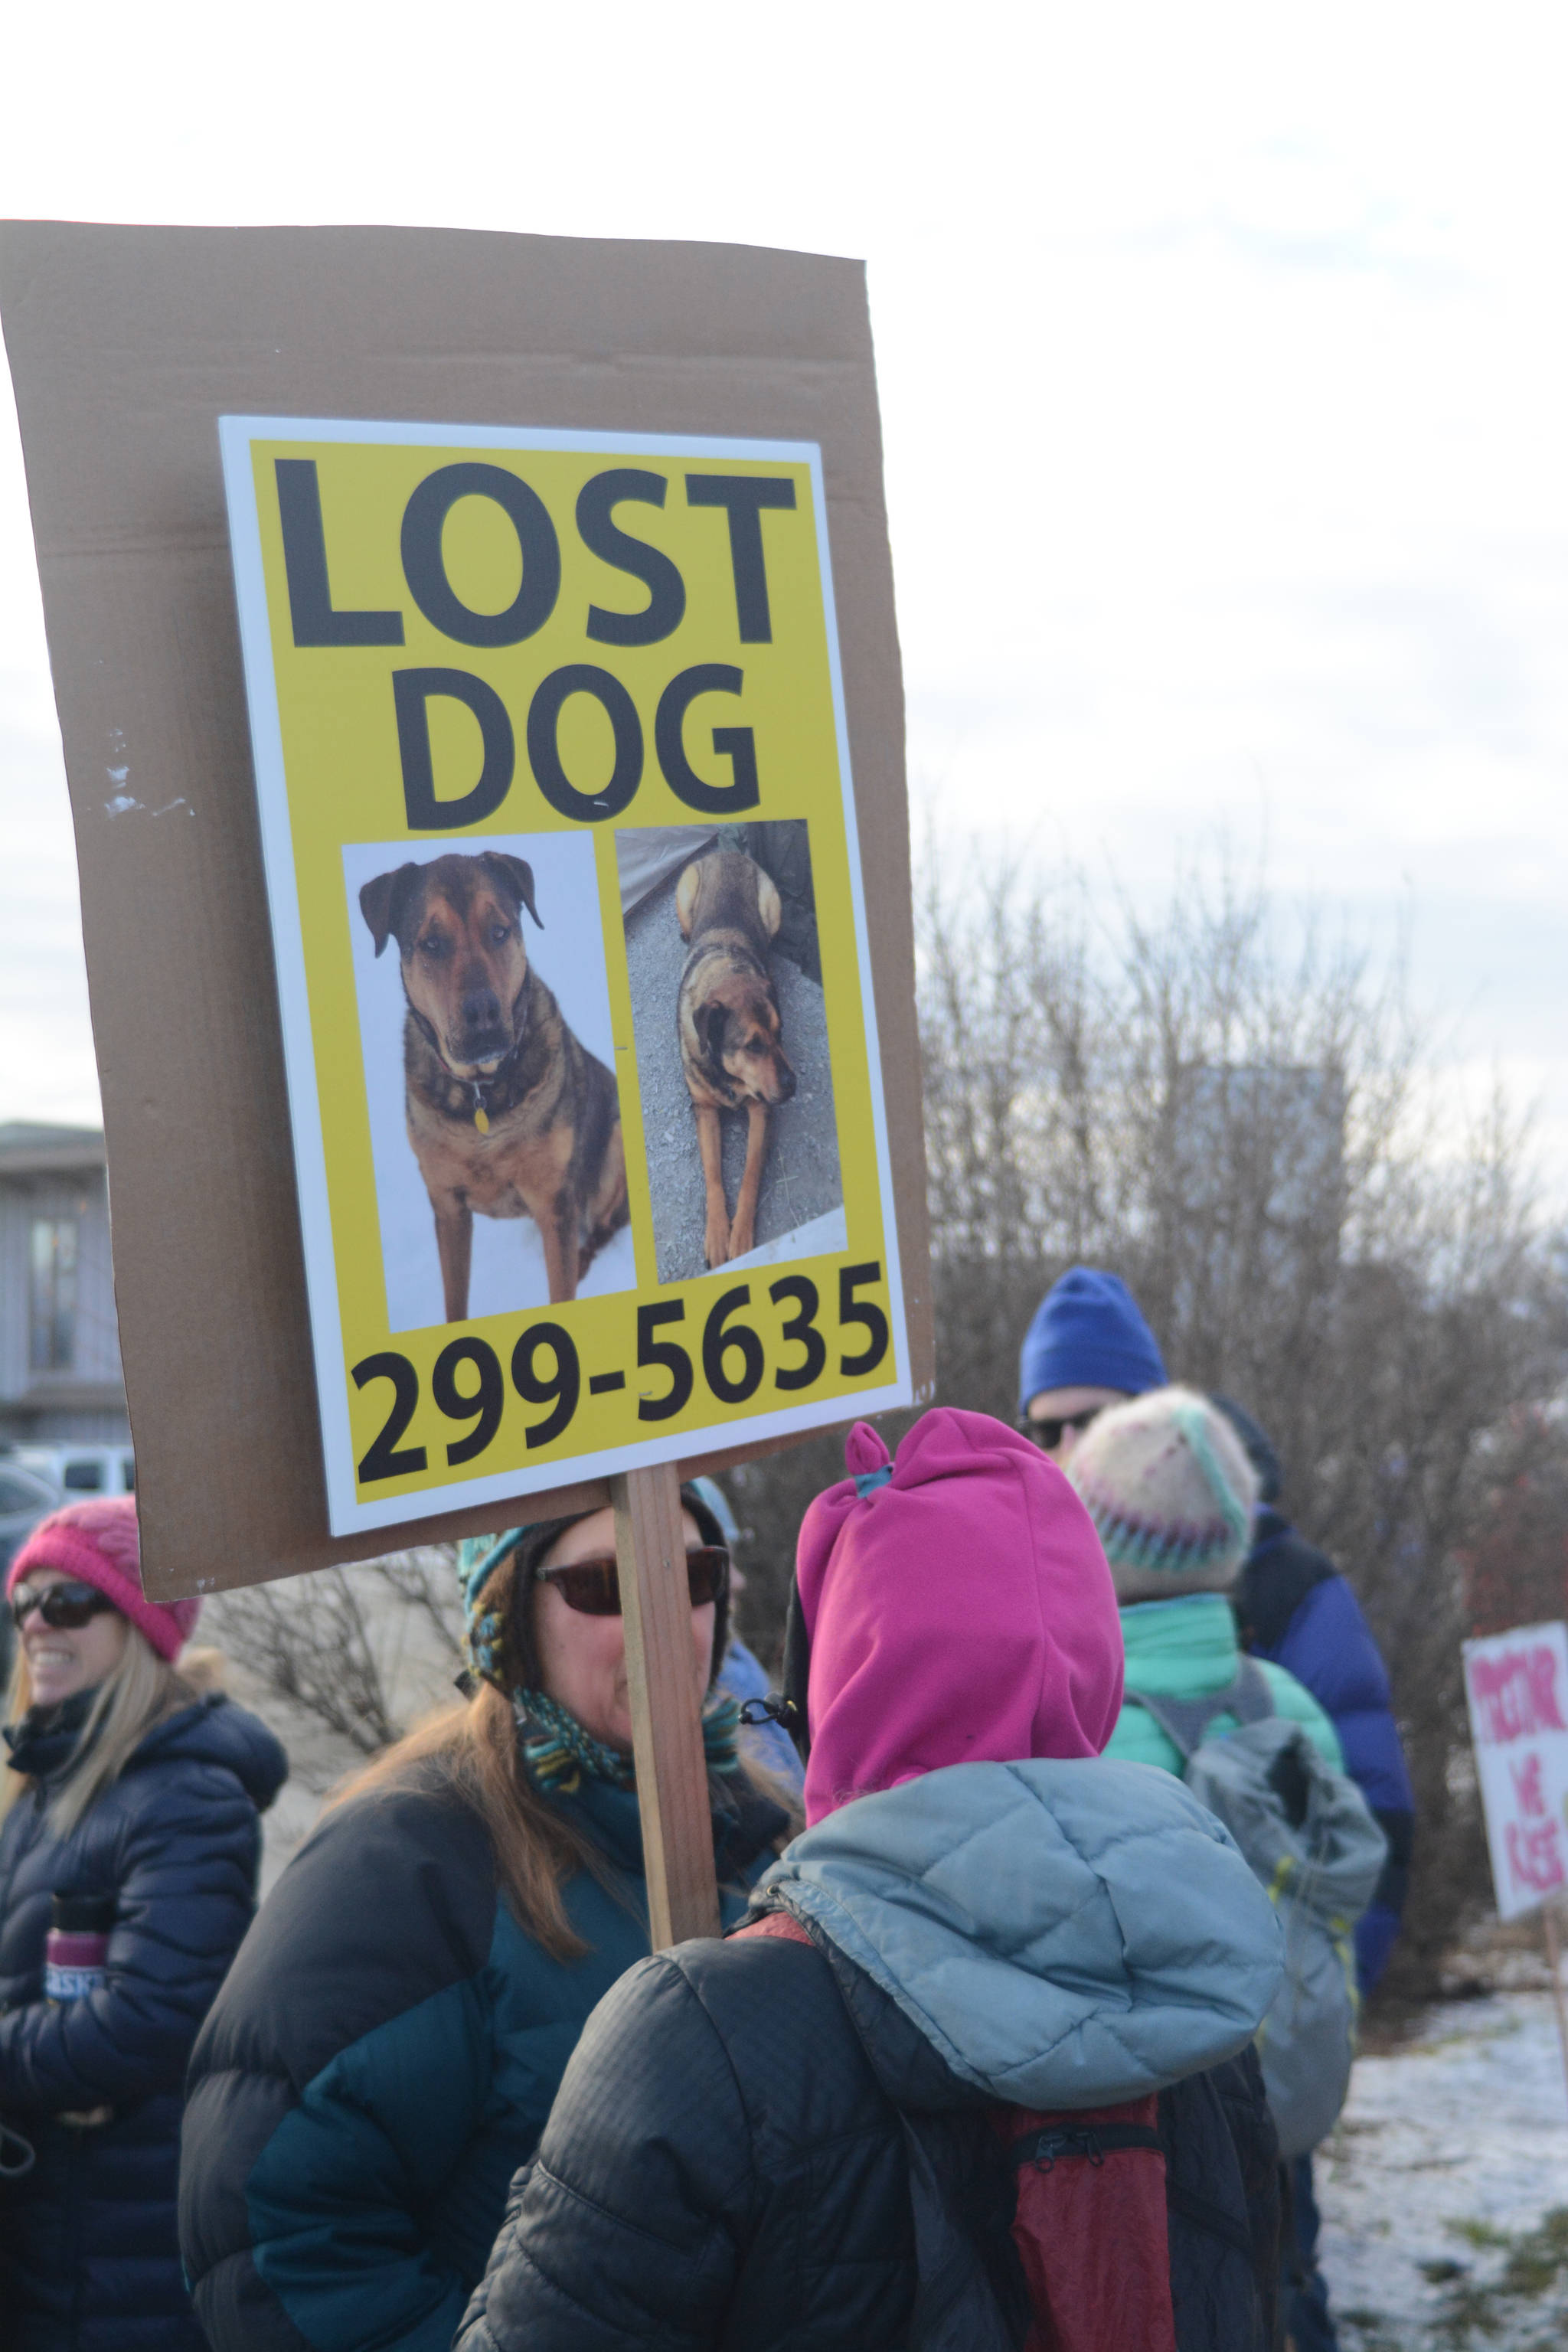 Along with protest signs, this woman carries a sign about her lost dog in the Homer March for Women on Saturday. About 700 people walked in the march along Pioneer Avenue on Jan. 20, 2018, in Homer, Alaska. The line of marchers extended from Main Street to Kachemak Way. (Photo by Michael Armstrong/Homer News)